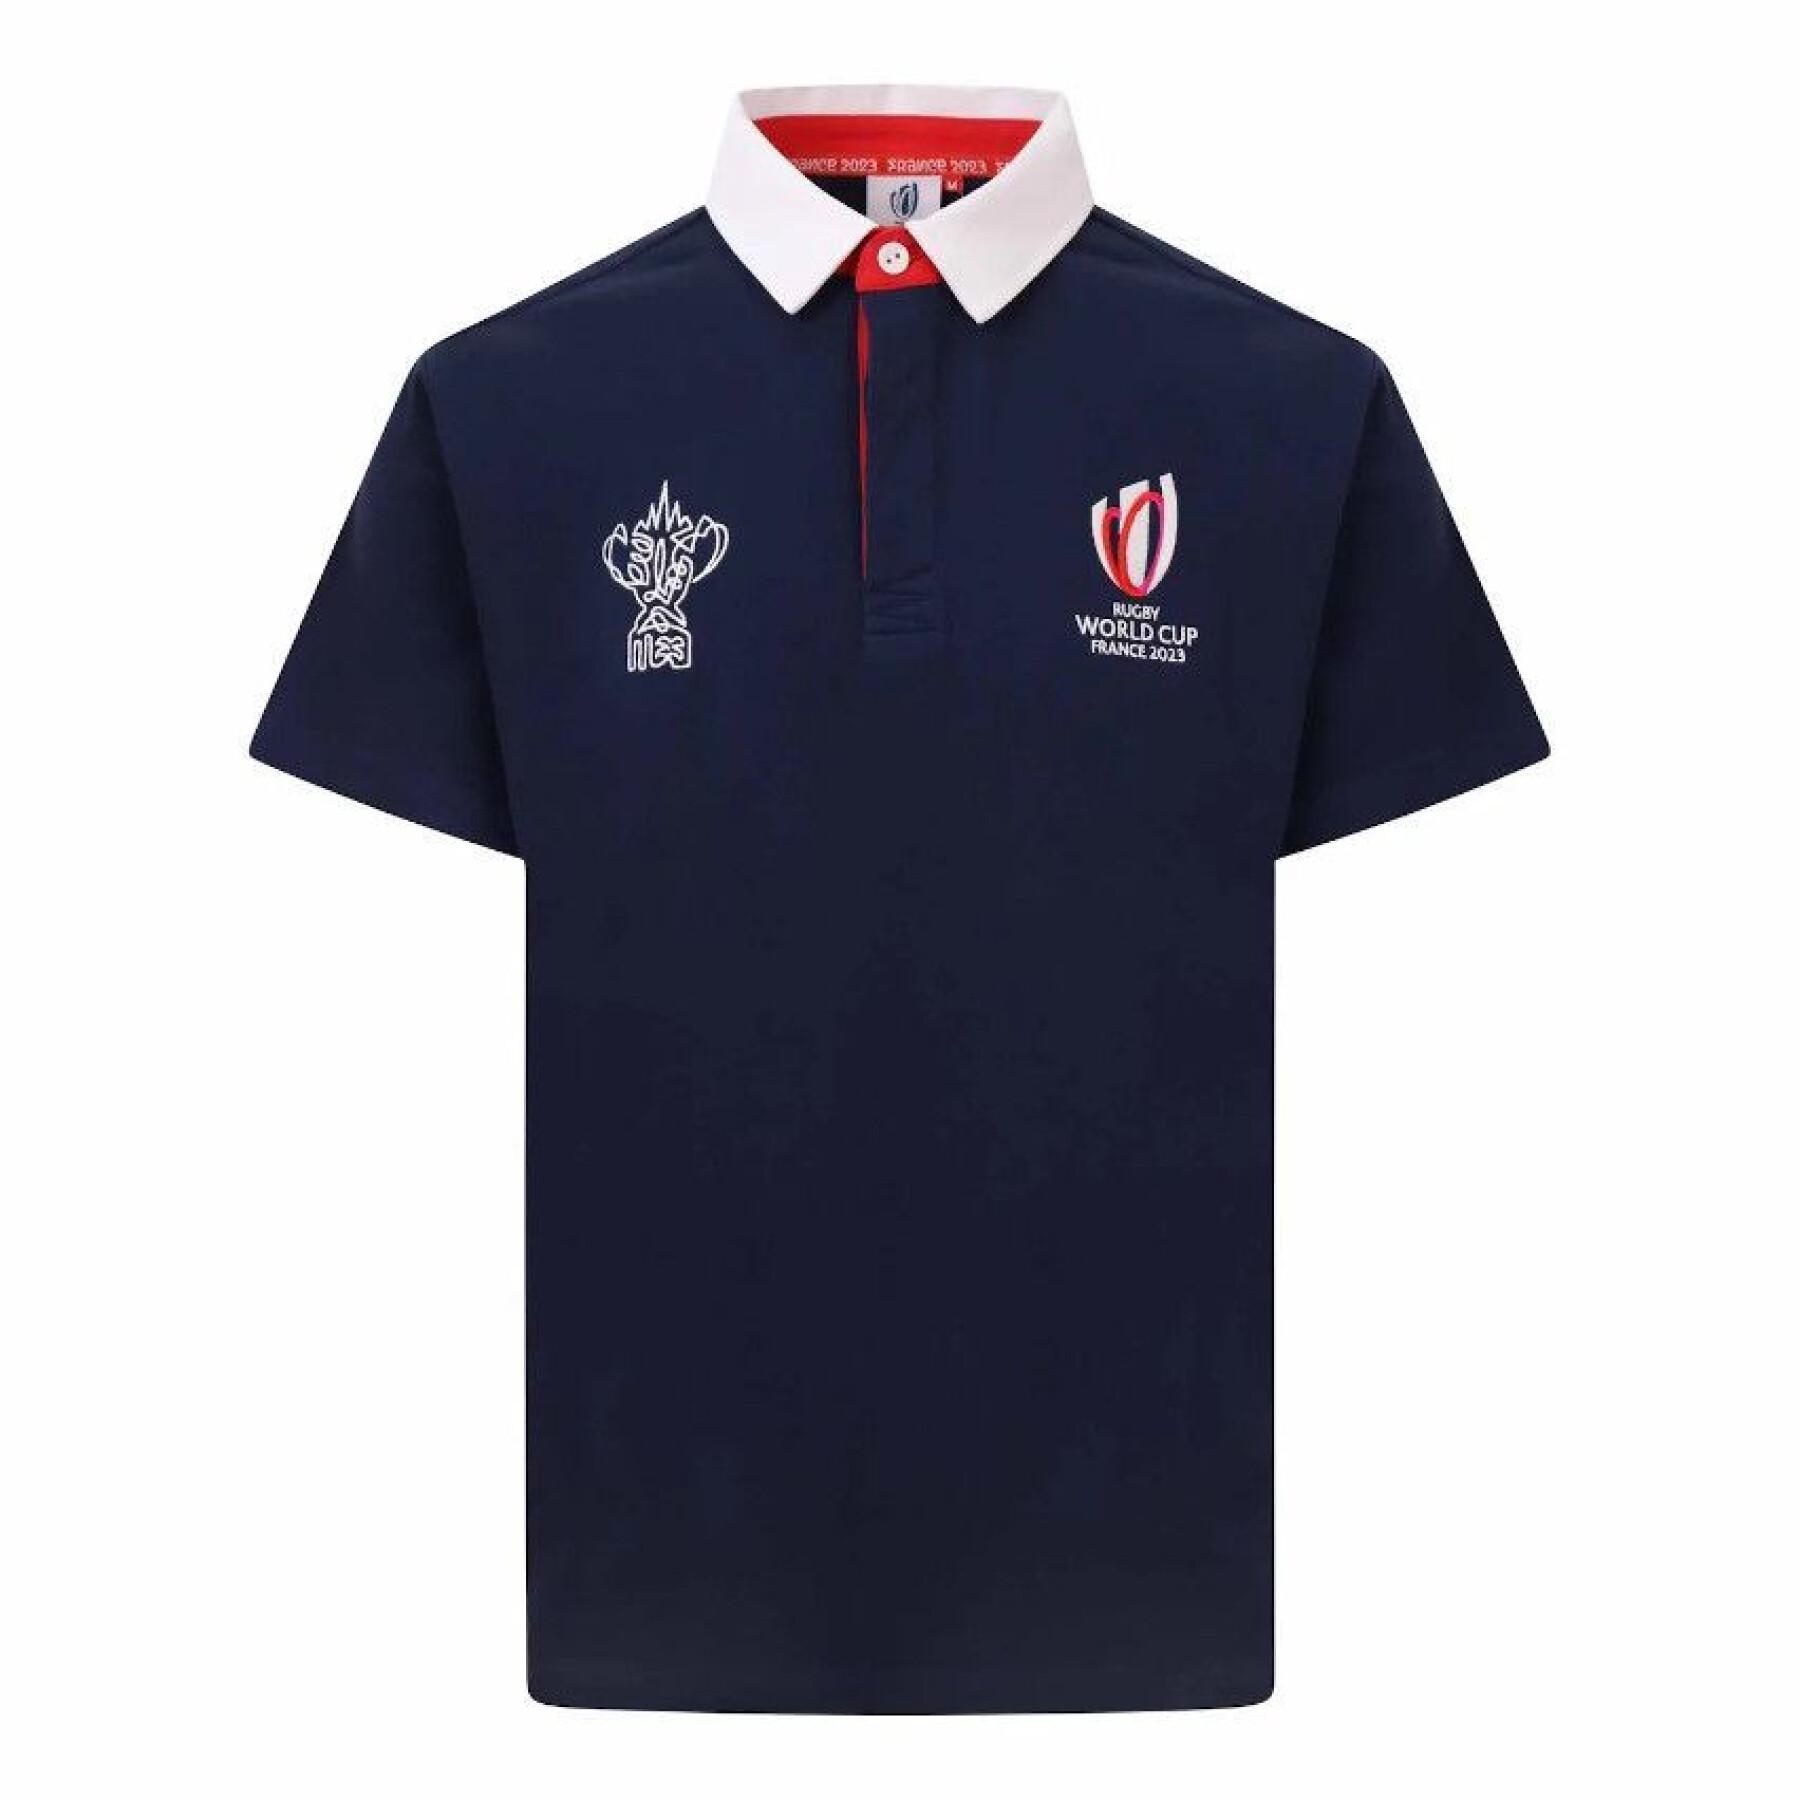 Rugby world cup trophy polo 2023